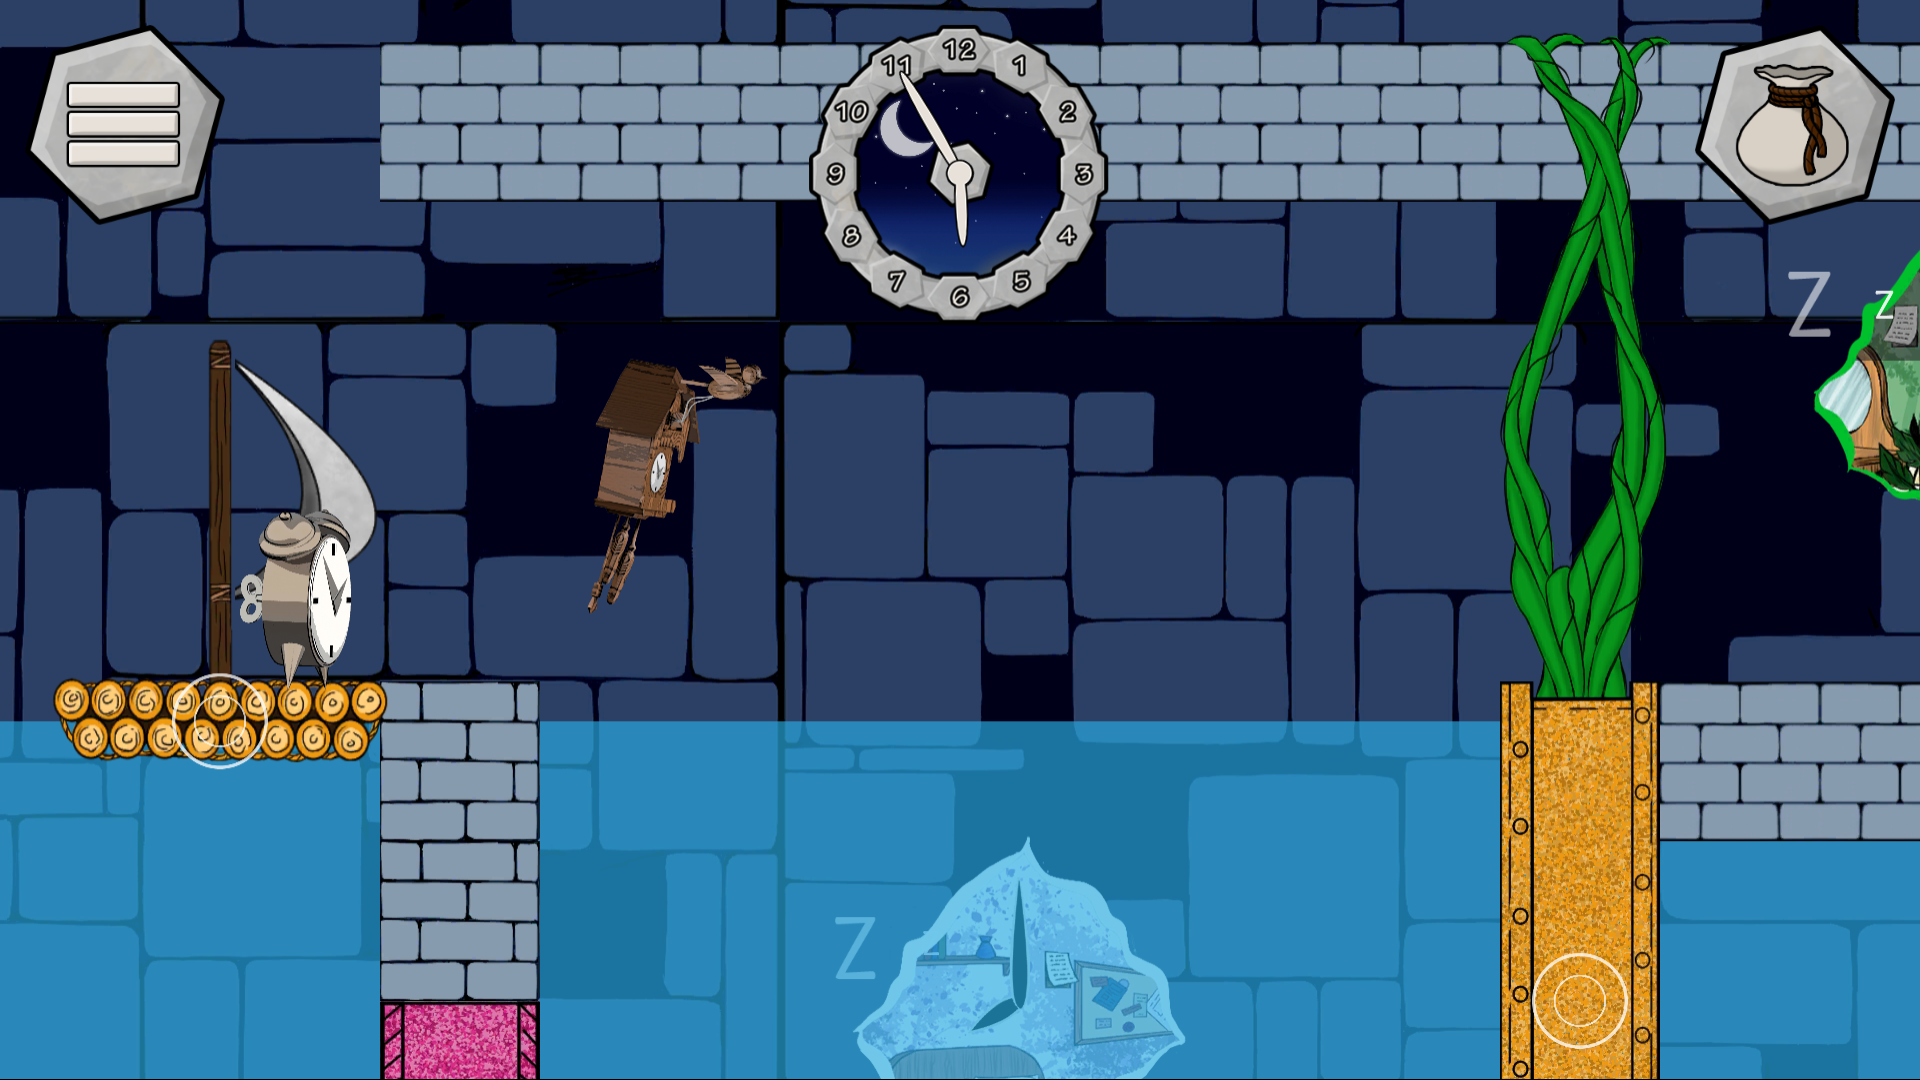 Screenshot of the game WAKE. It shows a level with a water setting from a 2D side-scrolling perspective. At the left side an alarm clock stands on top of a raft. To the right flies a cuckoo clock towards a hole between some vines that block the way to a green window. Below the vines appears to be a floodgate and under water, below the cuckoo clock is a white window. The UI at the top of the screen displays a menu button, the current time and an inventory.